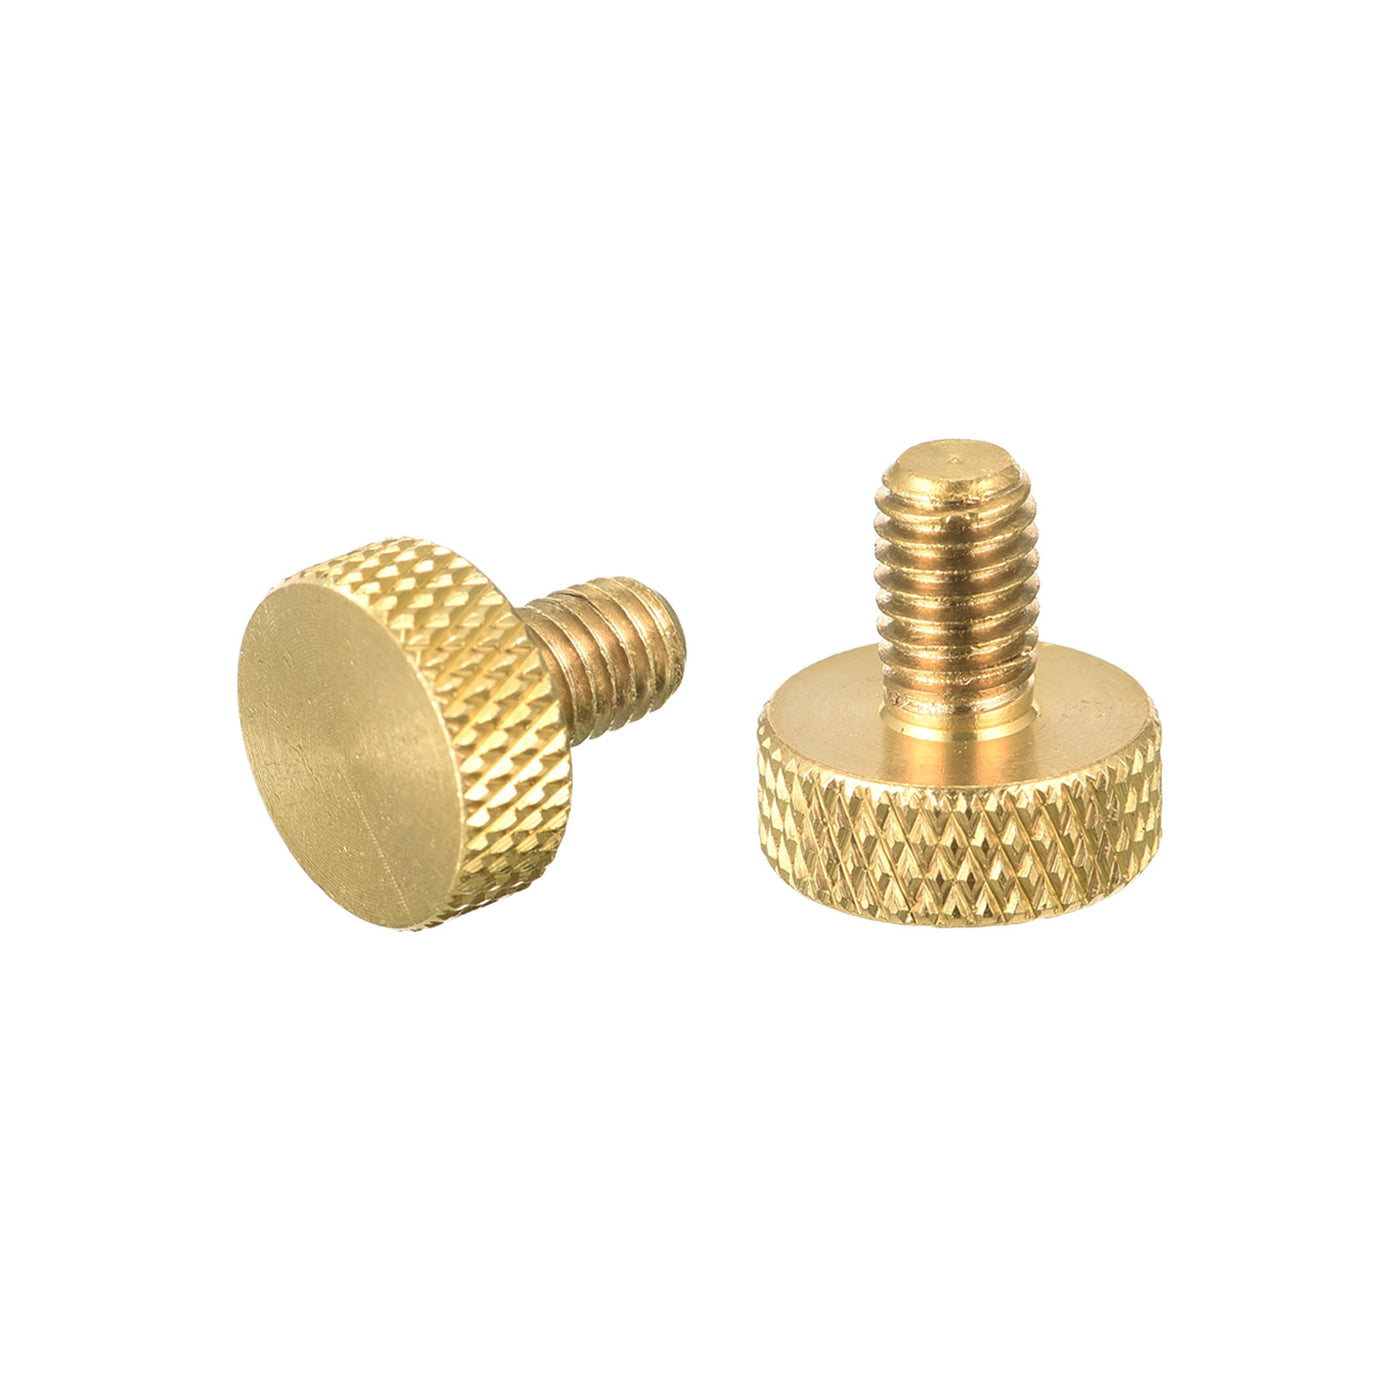 uxcell Uxcell 2Pcs Brass Knurled Thumb Screws, M5x8mm  Flat Grip Bolt Knobs Fasteners for Electronic, Mechanical